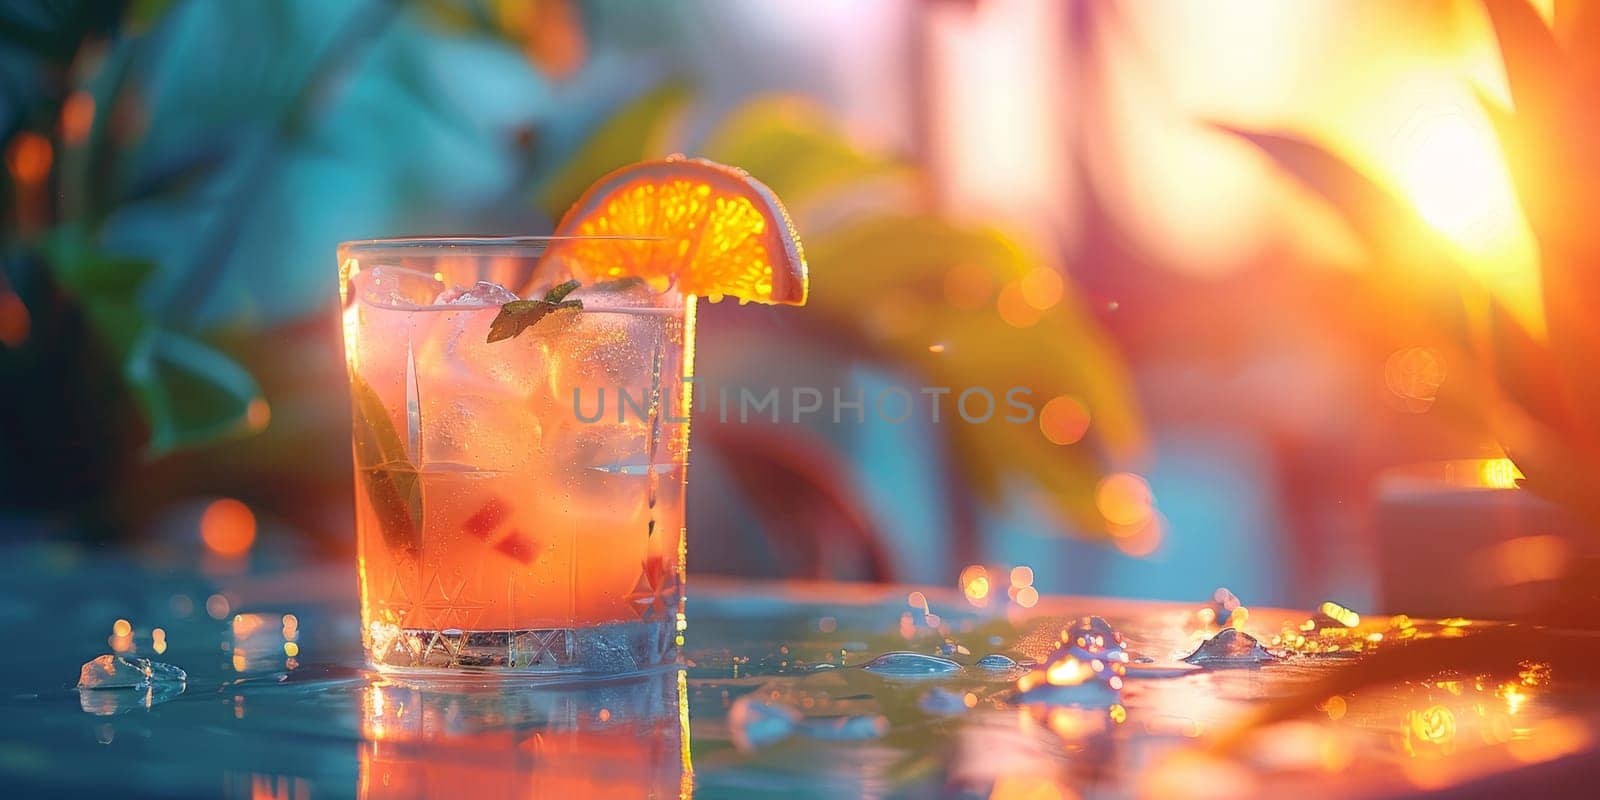 A glass of a drink with an orange slice in it. The image has a bright and cheerful mood, with the sun shining on the drink and the surrounding area